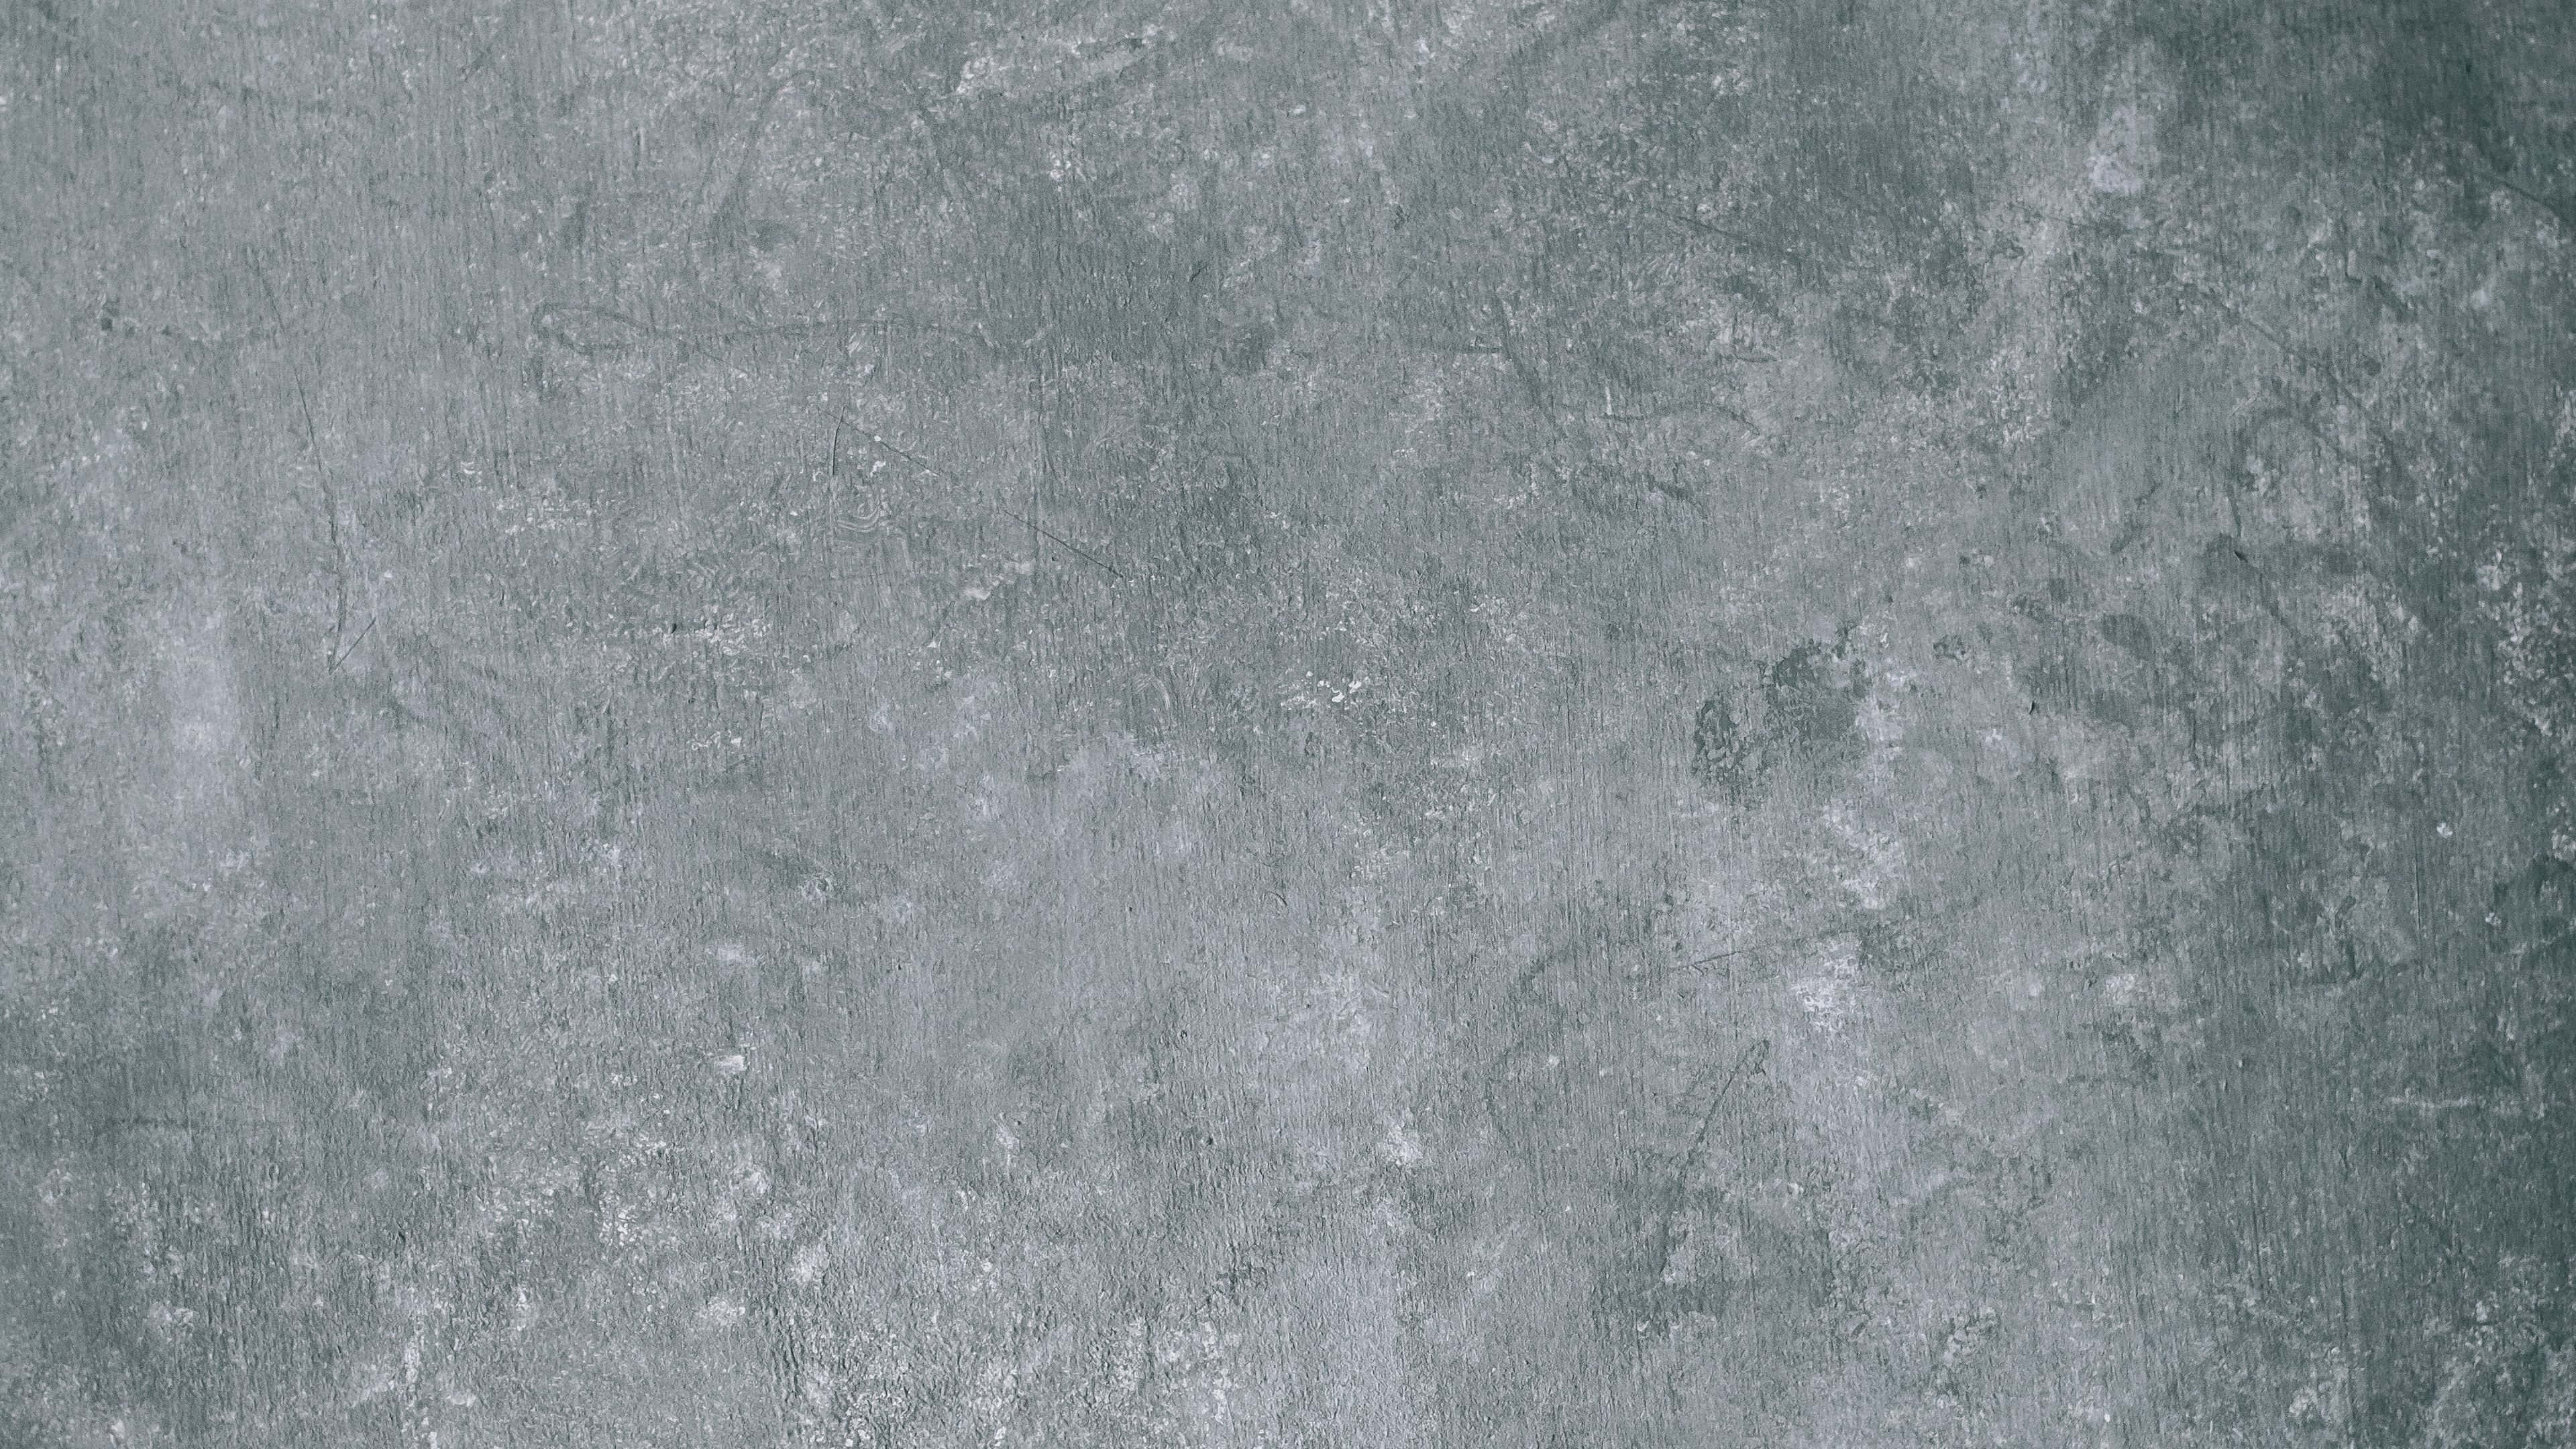 Rough and Raw Concrete Texture